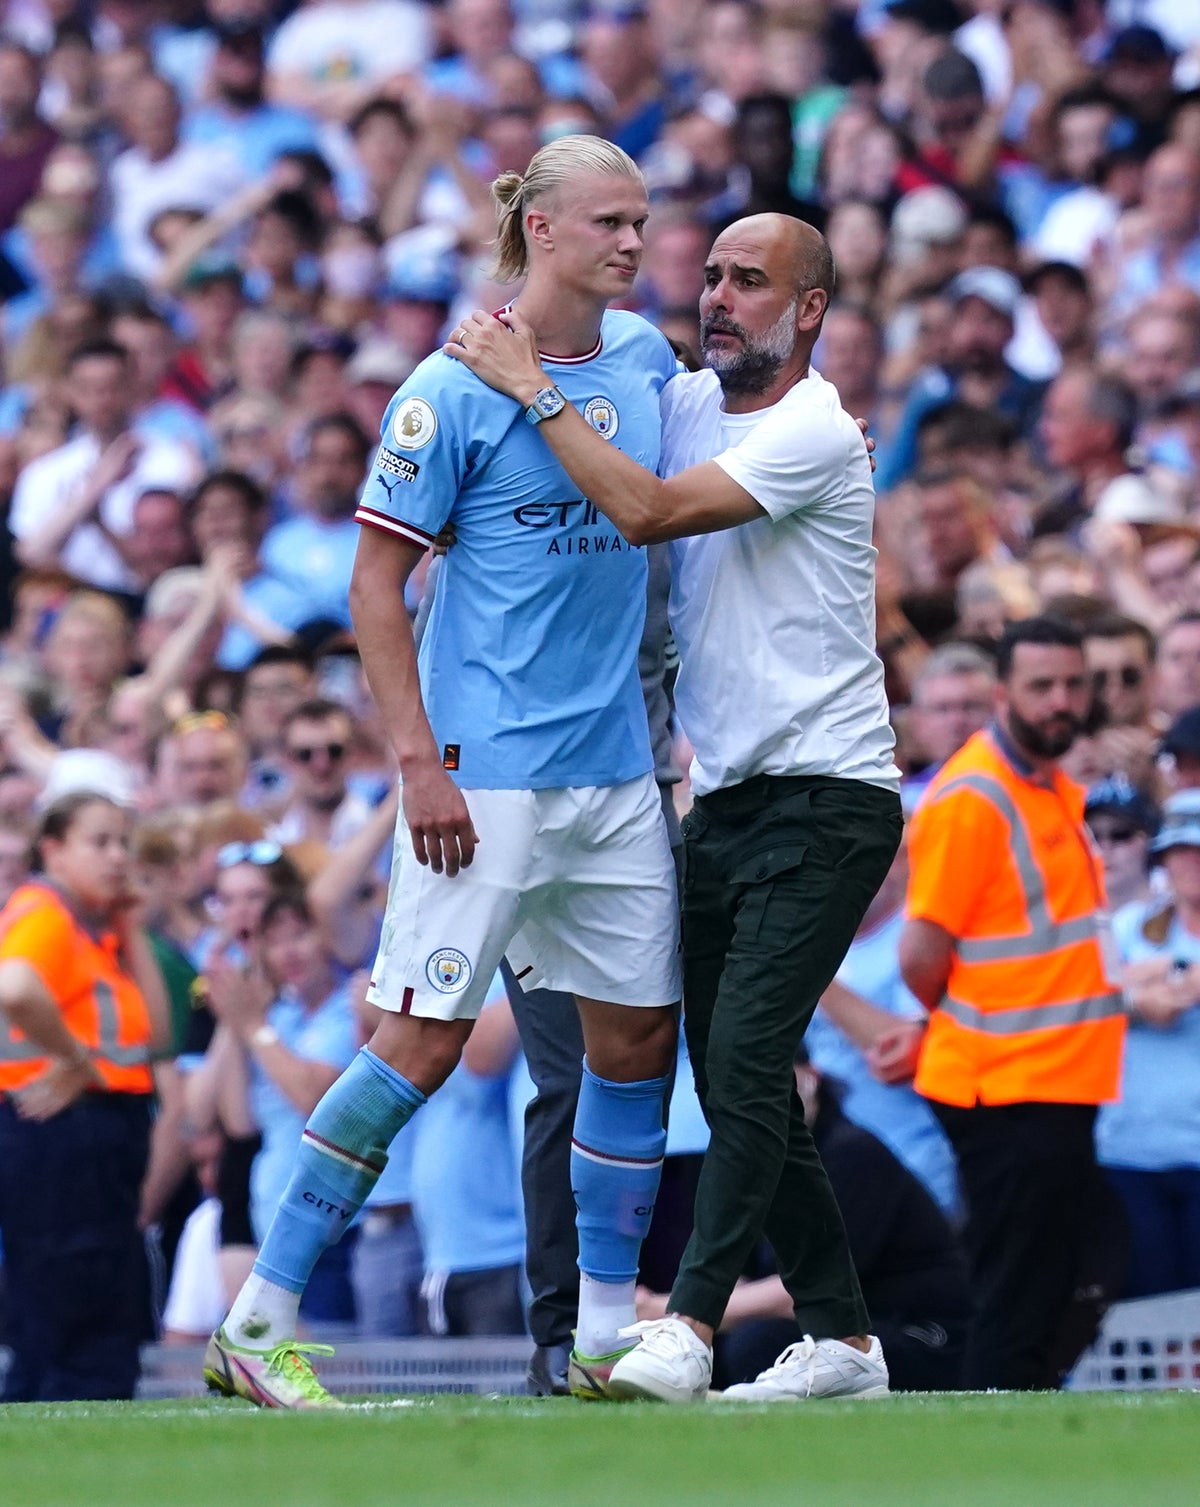 Manchester City boss Pep Guardiola says patience will pay off for Erling Haaland